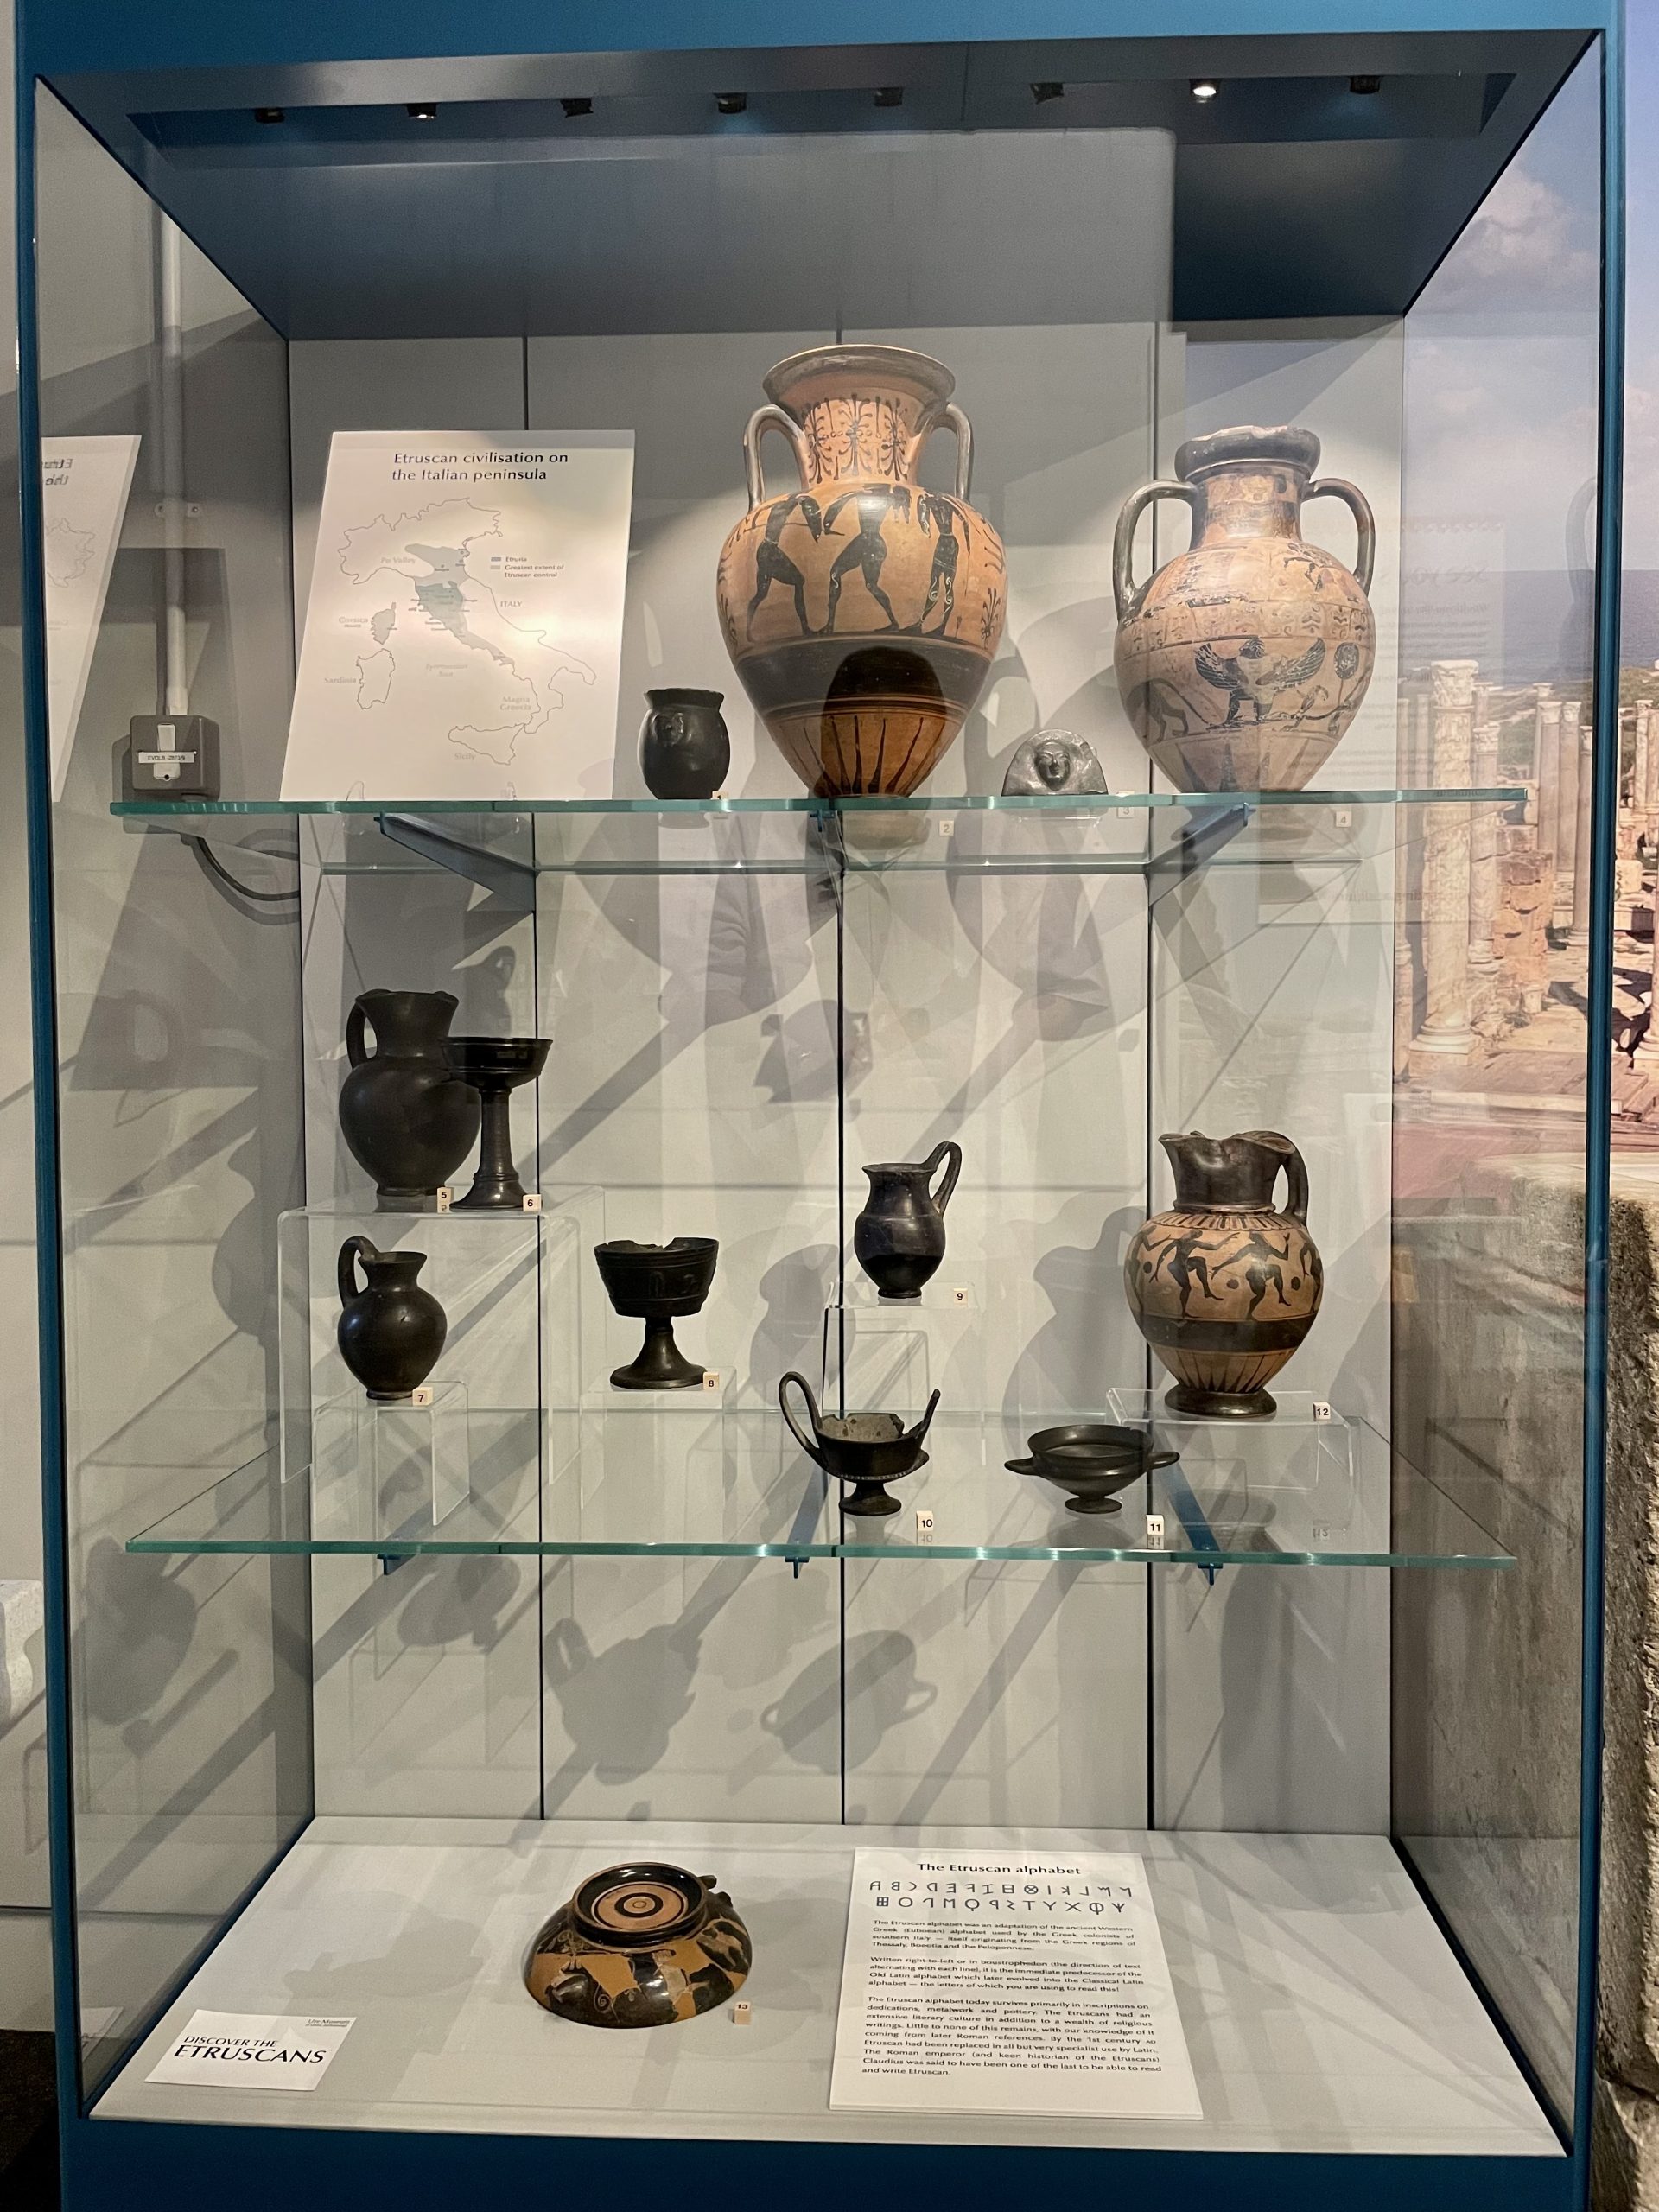 Discover the Etruscans